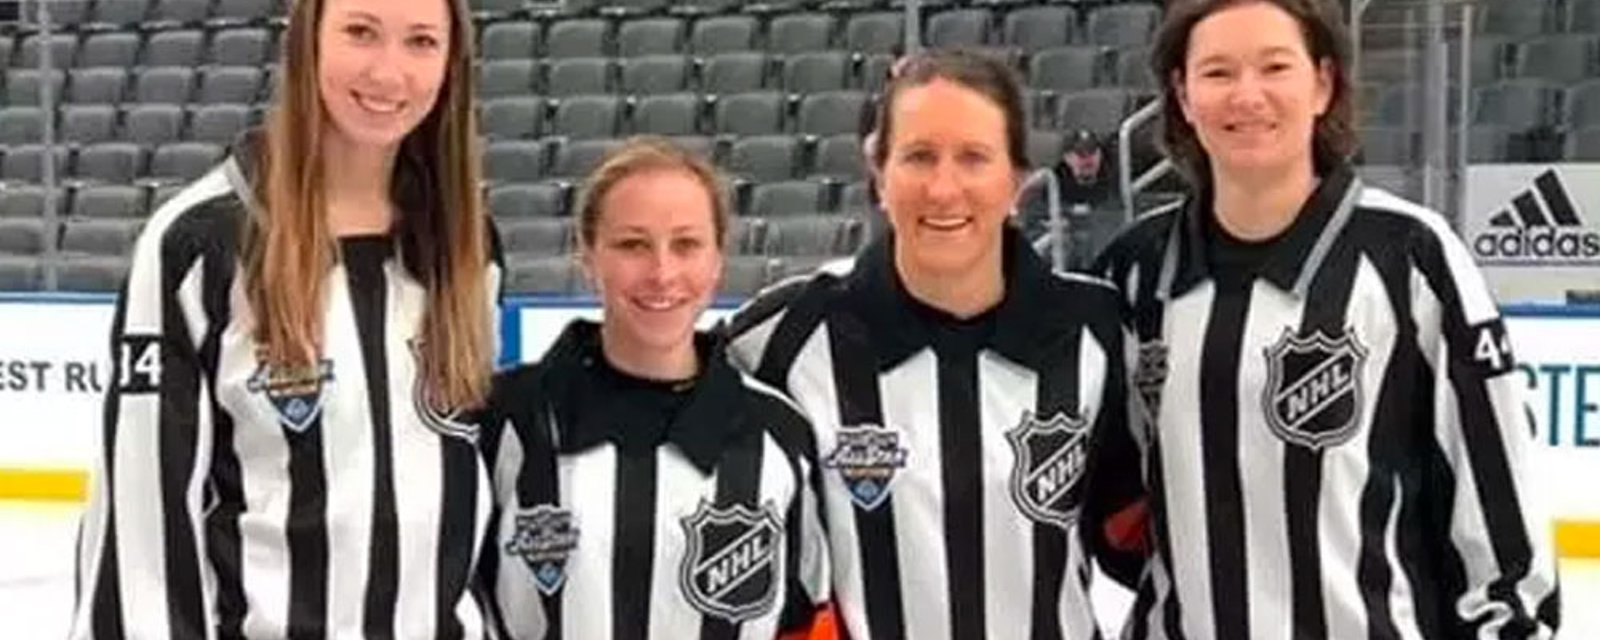 Report: Female referees on the way for NHL?